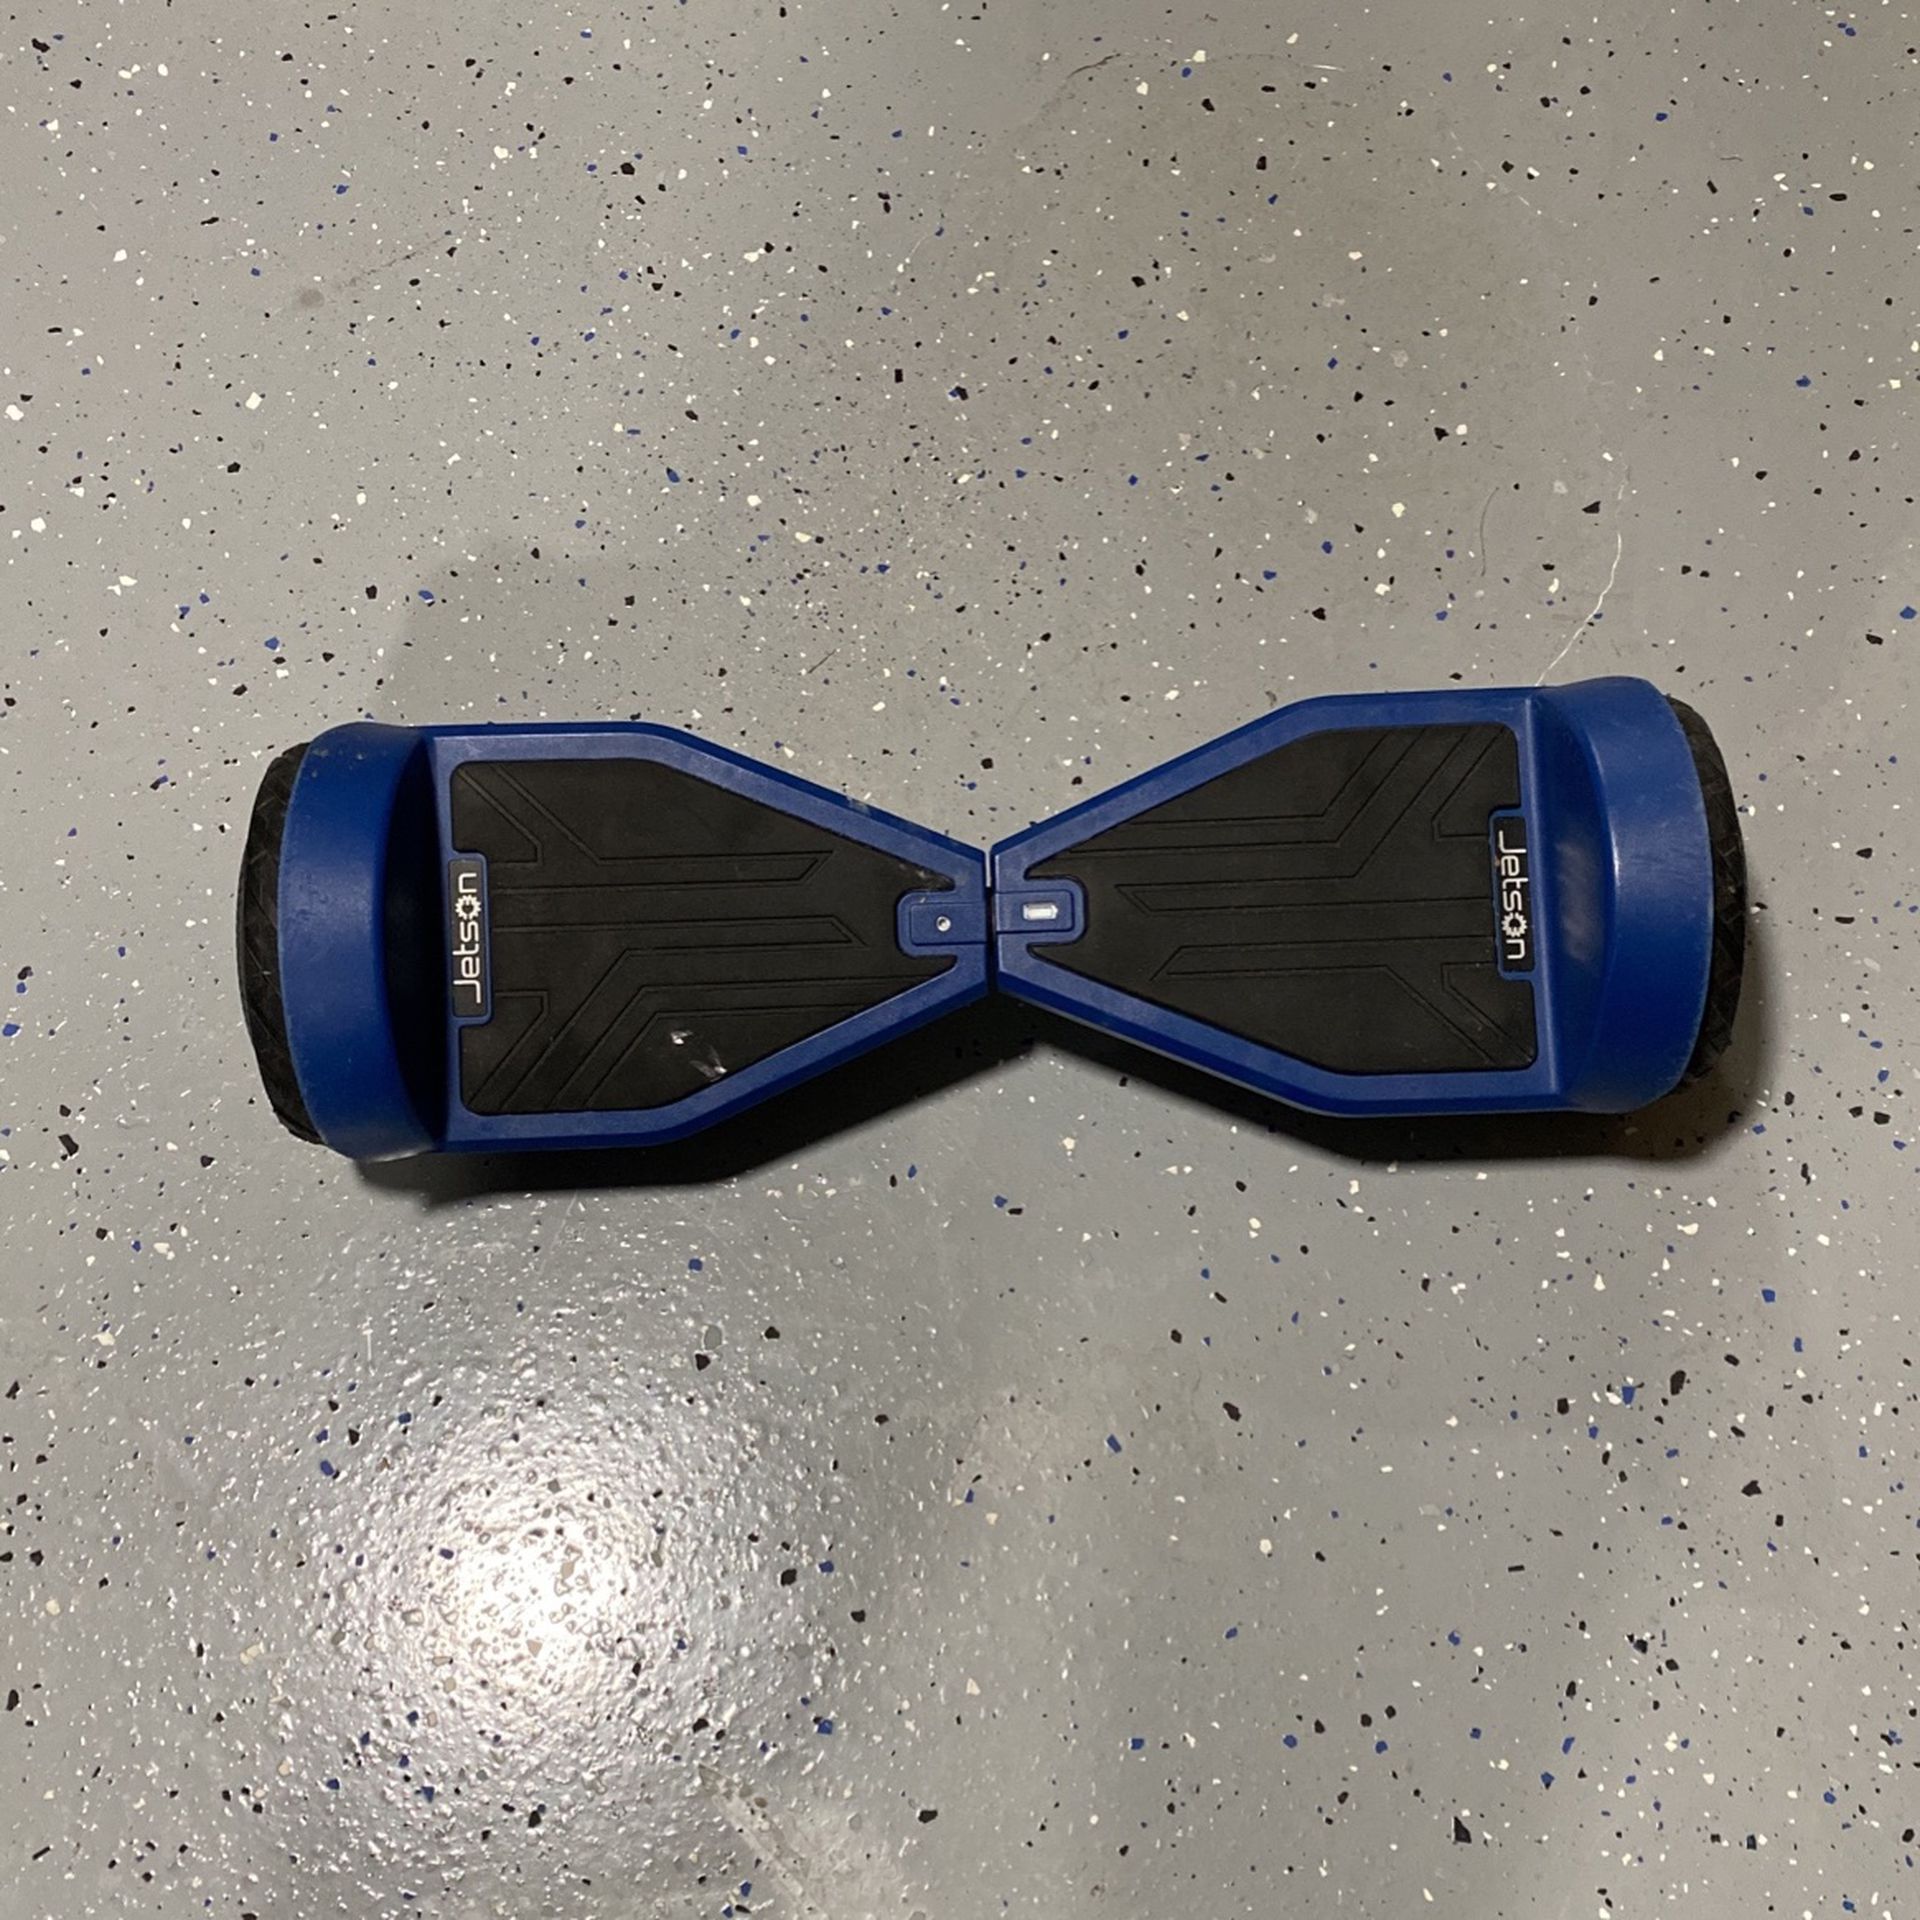 Jetson hoverboard With Charger